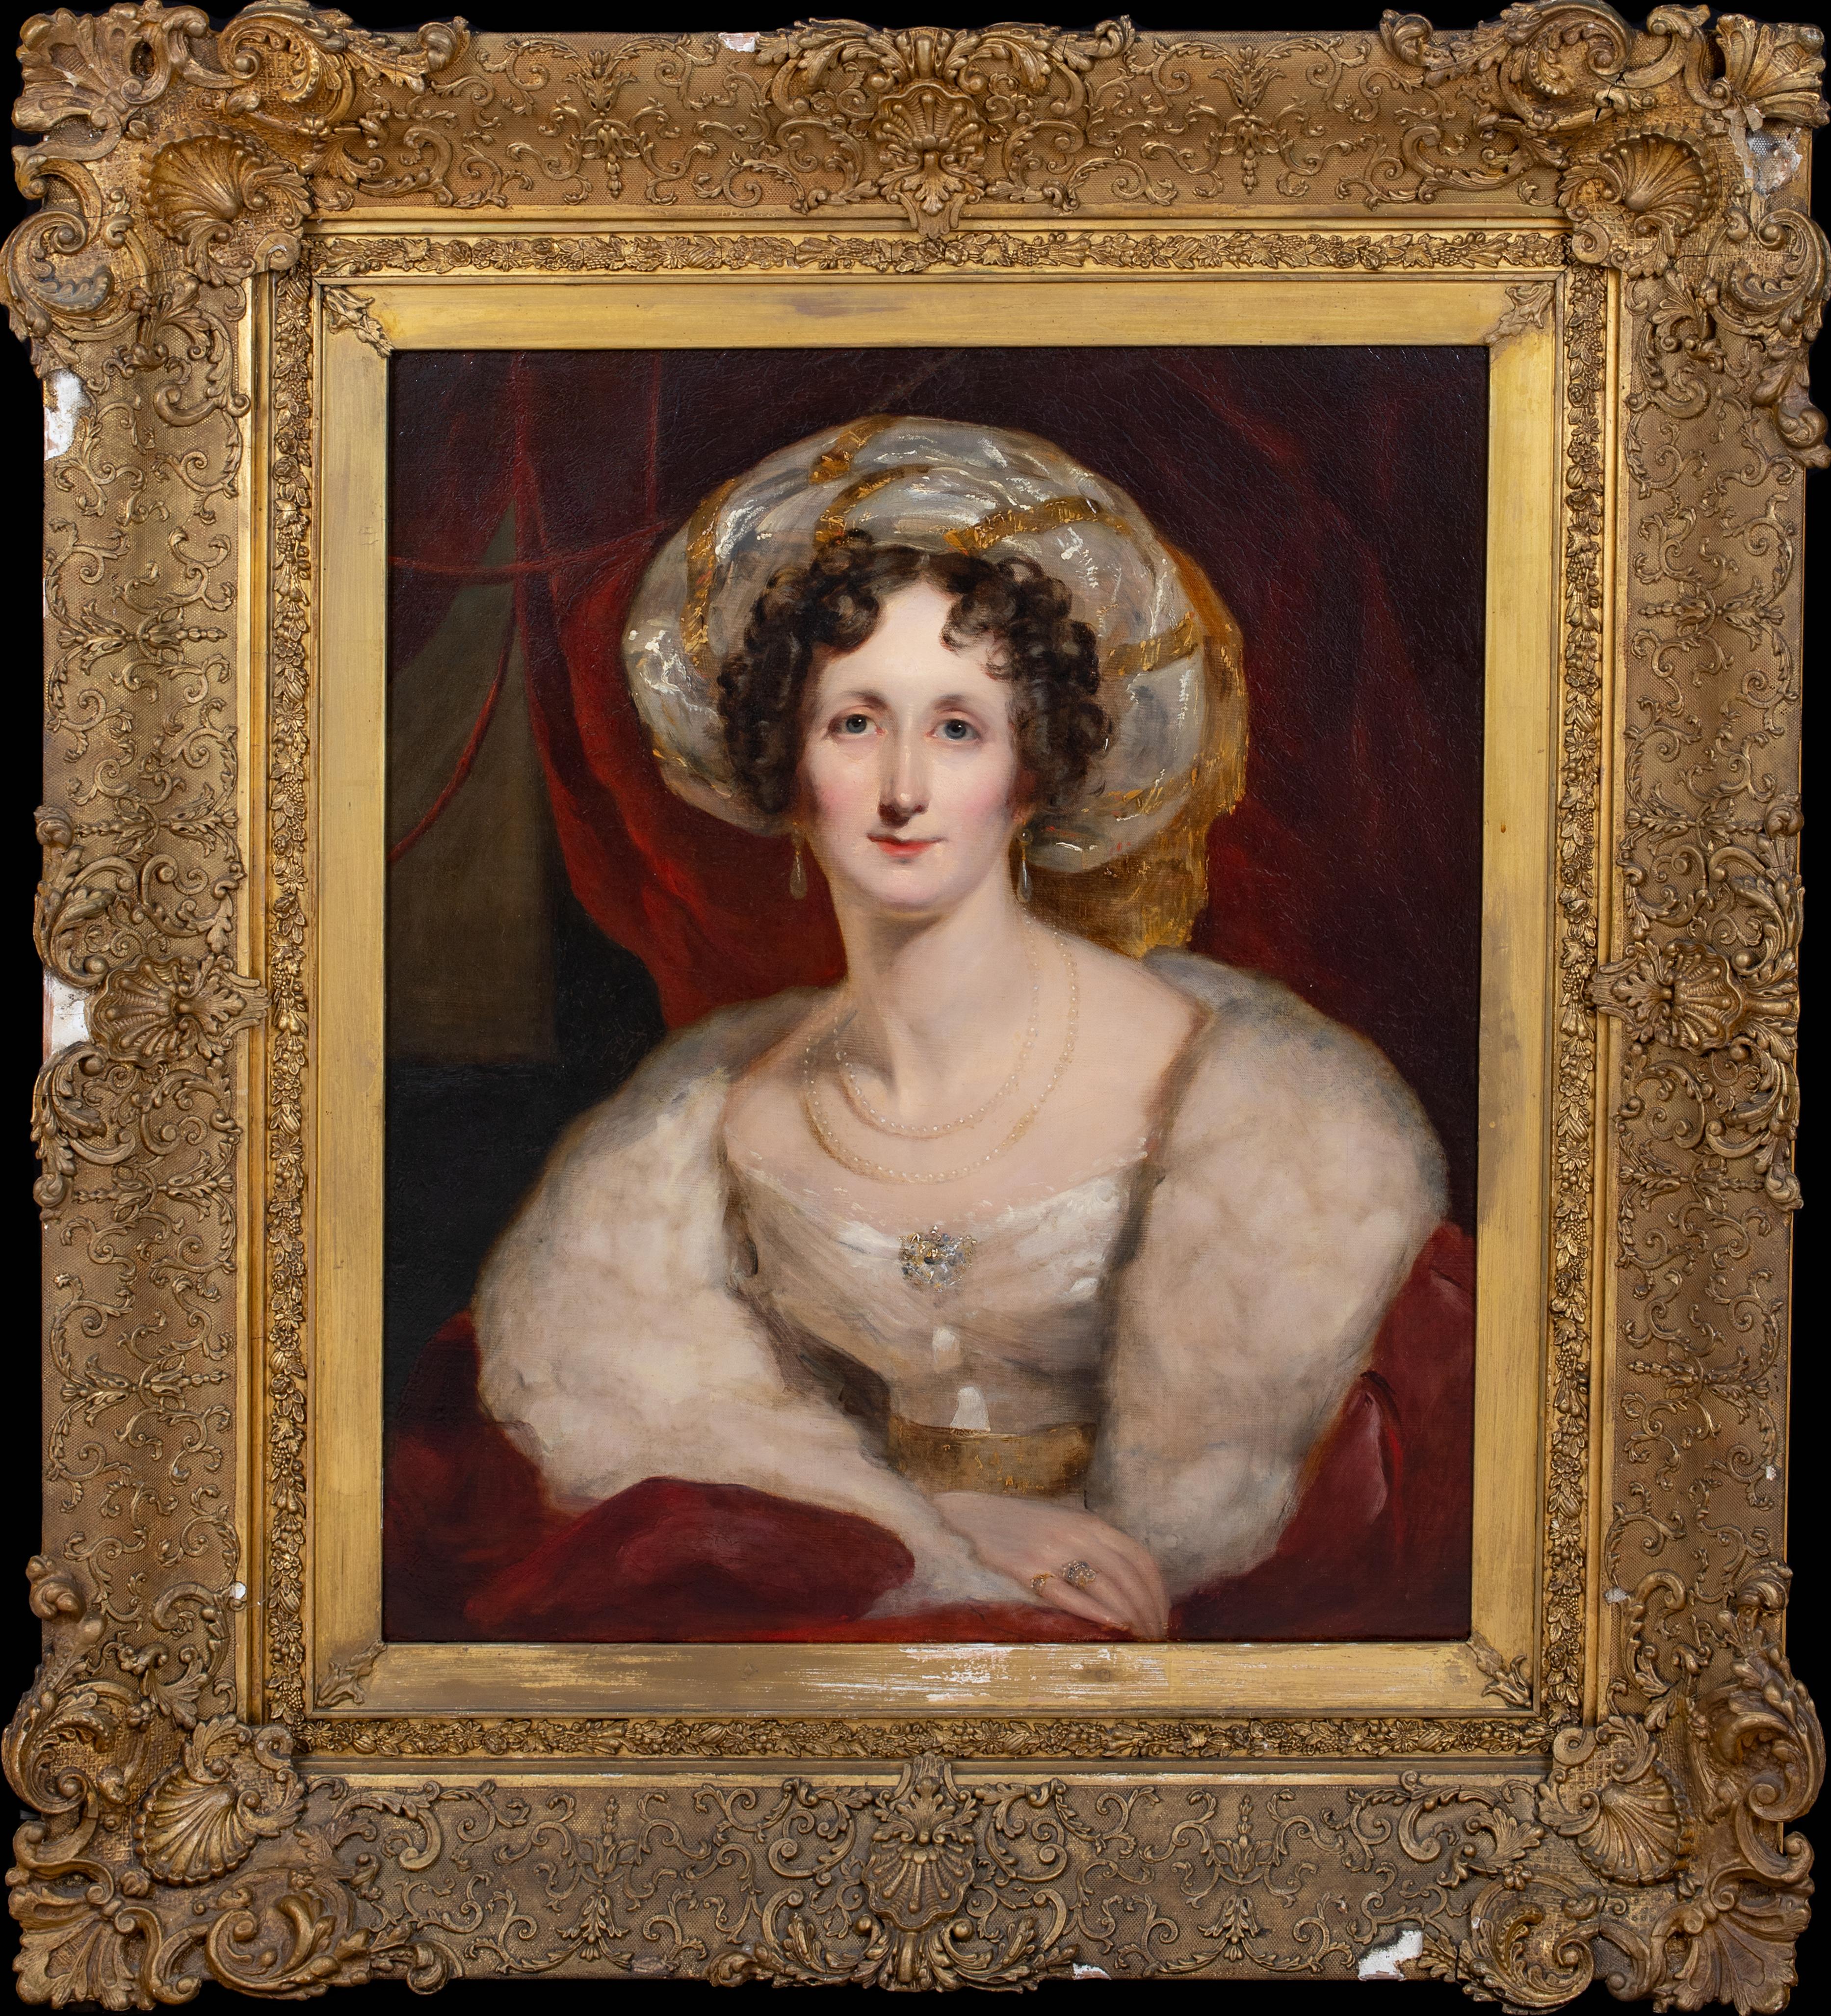 Unknown Portrait Painting - Portrait Of A Lady Wearing A Gold & White Turban, circa 1820  